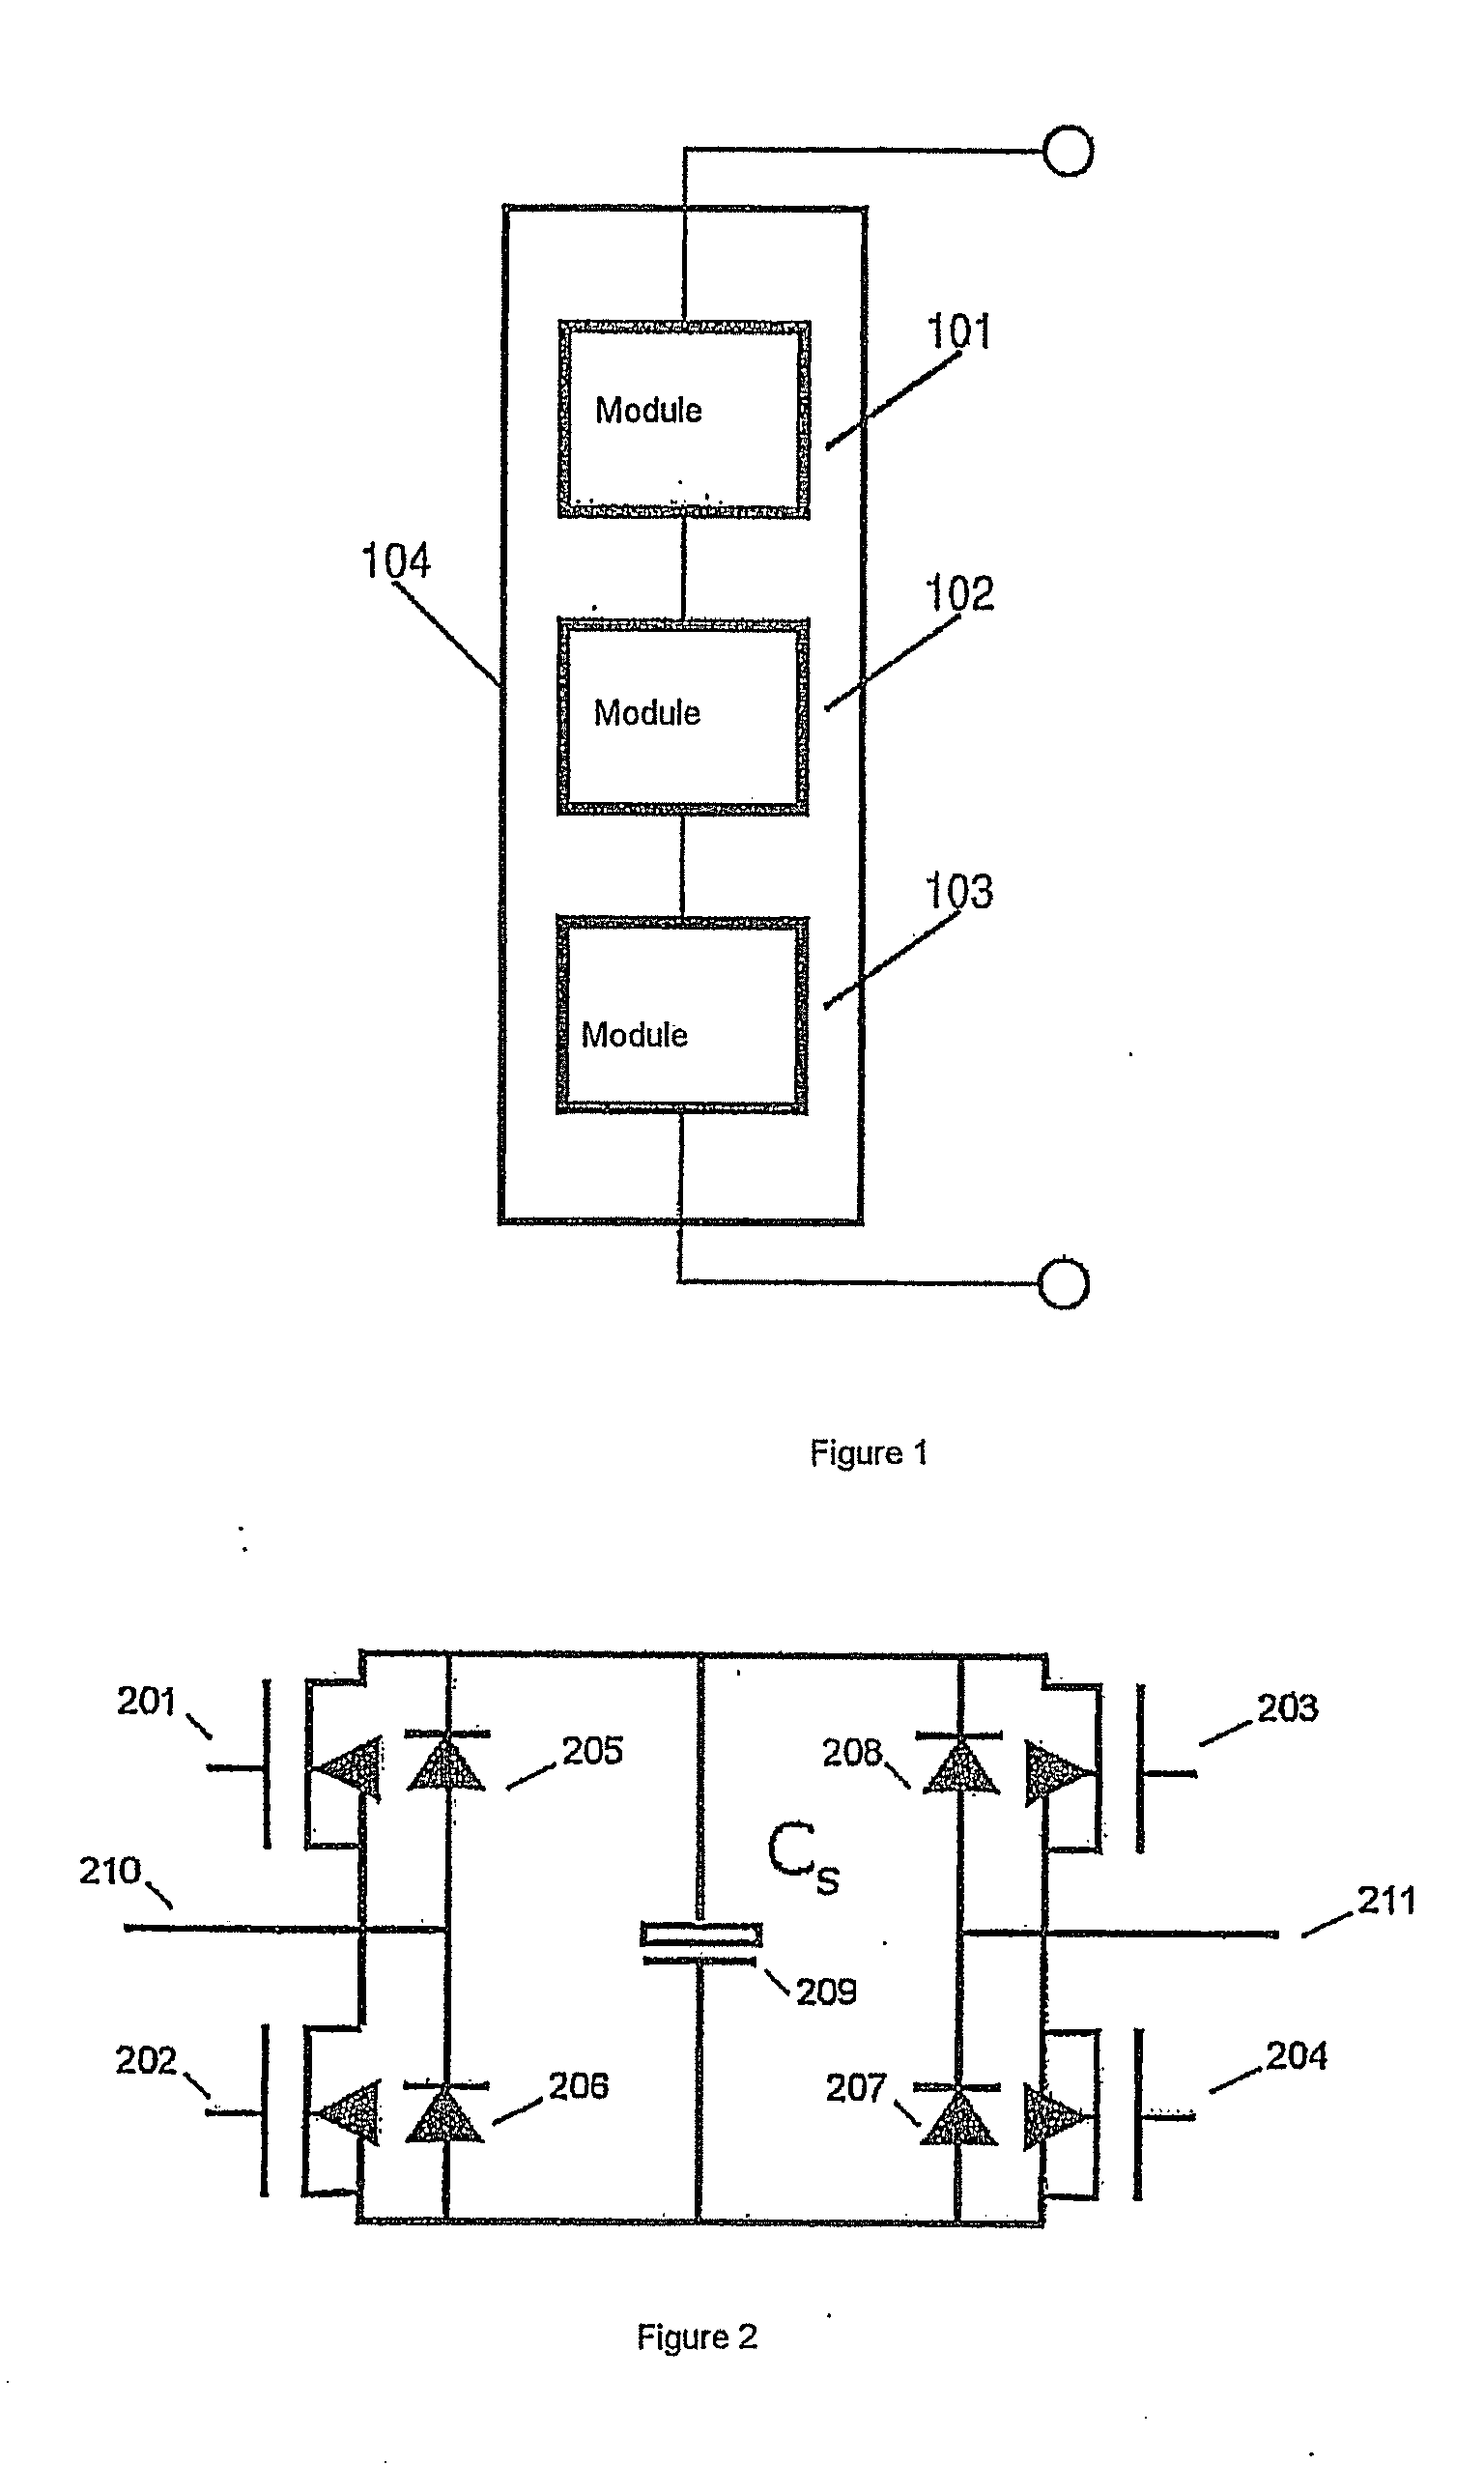 Novel multi-level converter topology with the possibility of dynamically connecting individual modules in series and in parallel